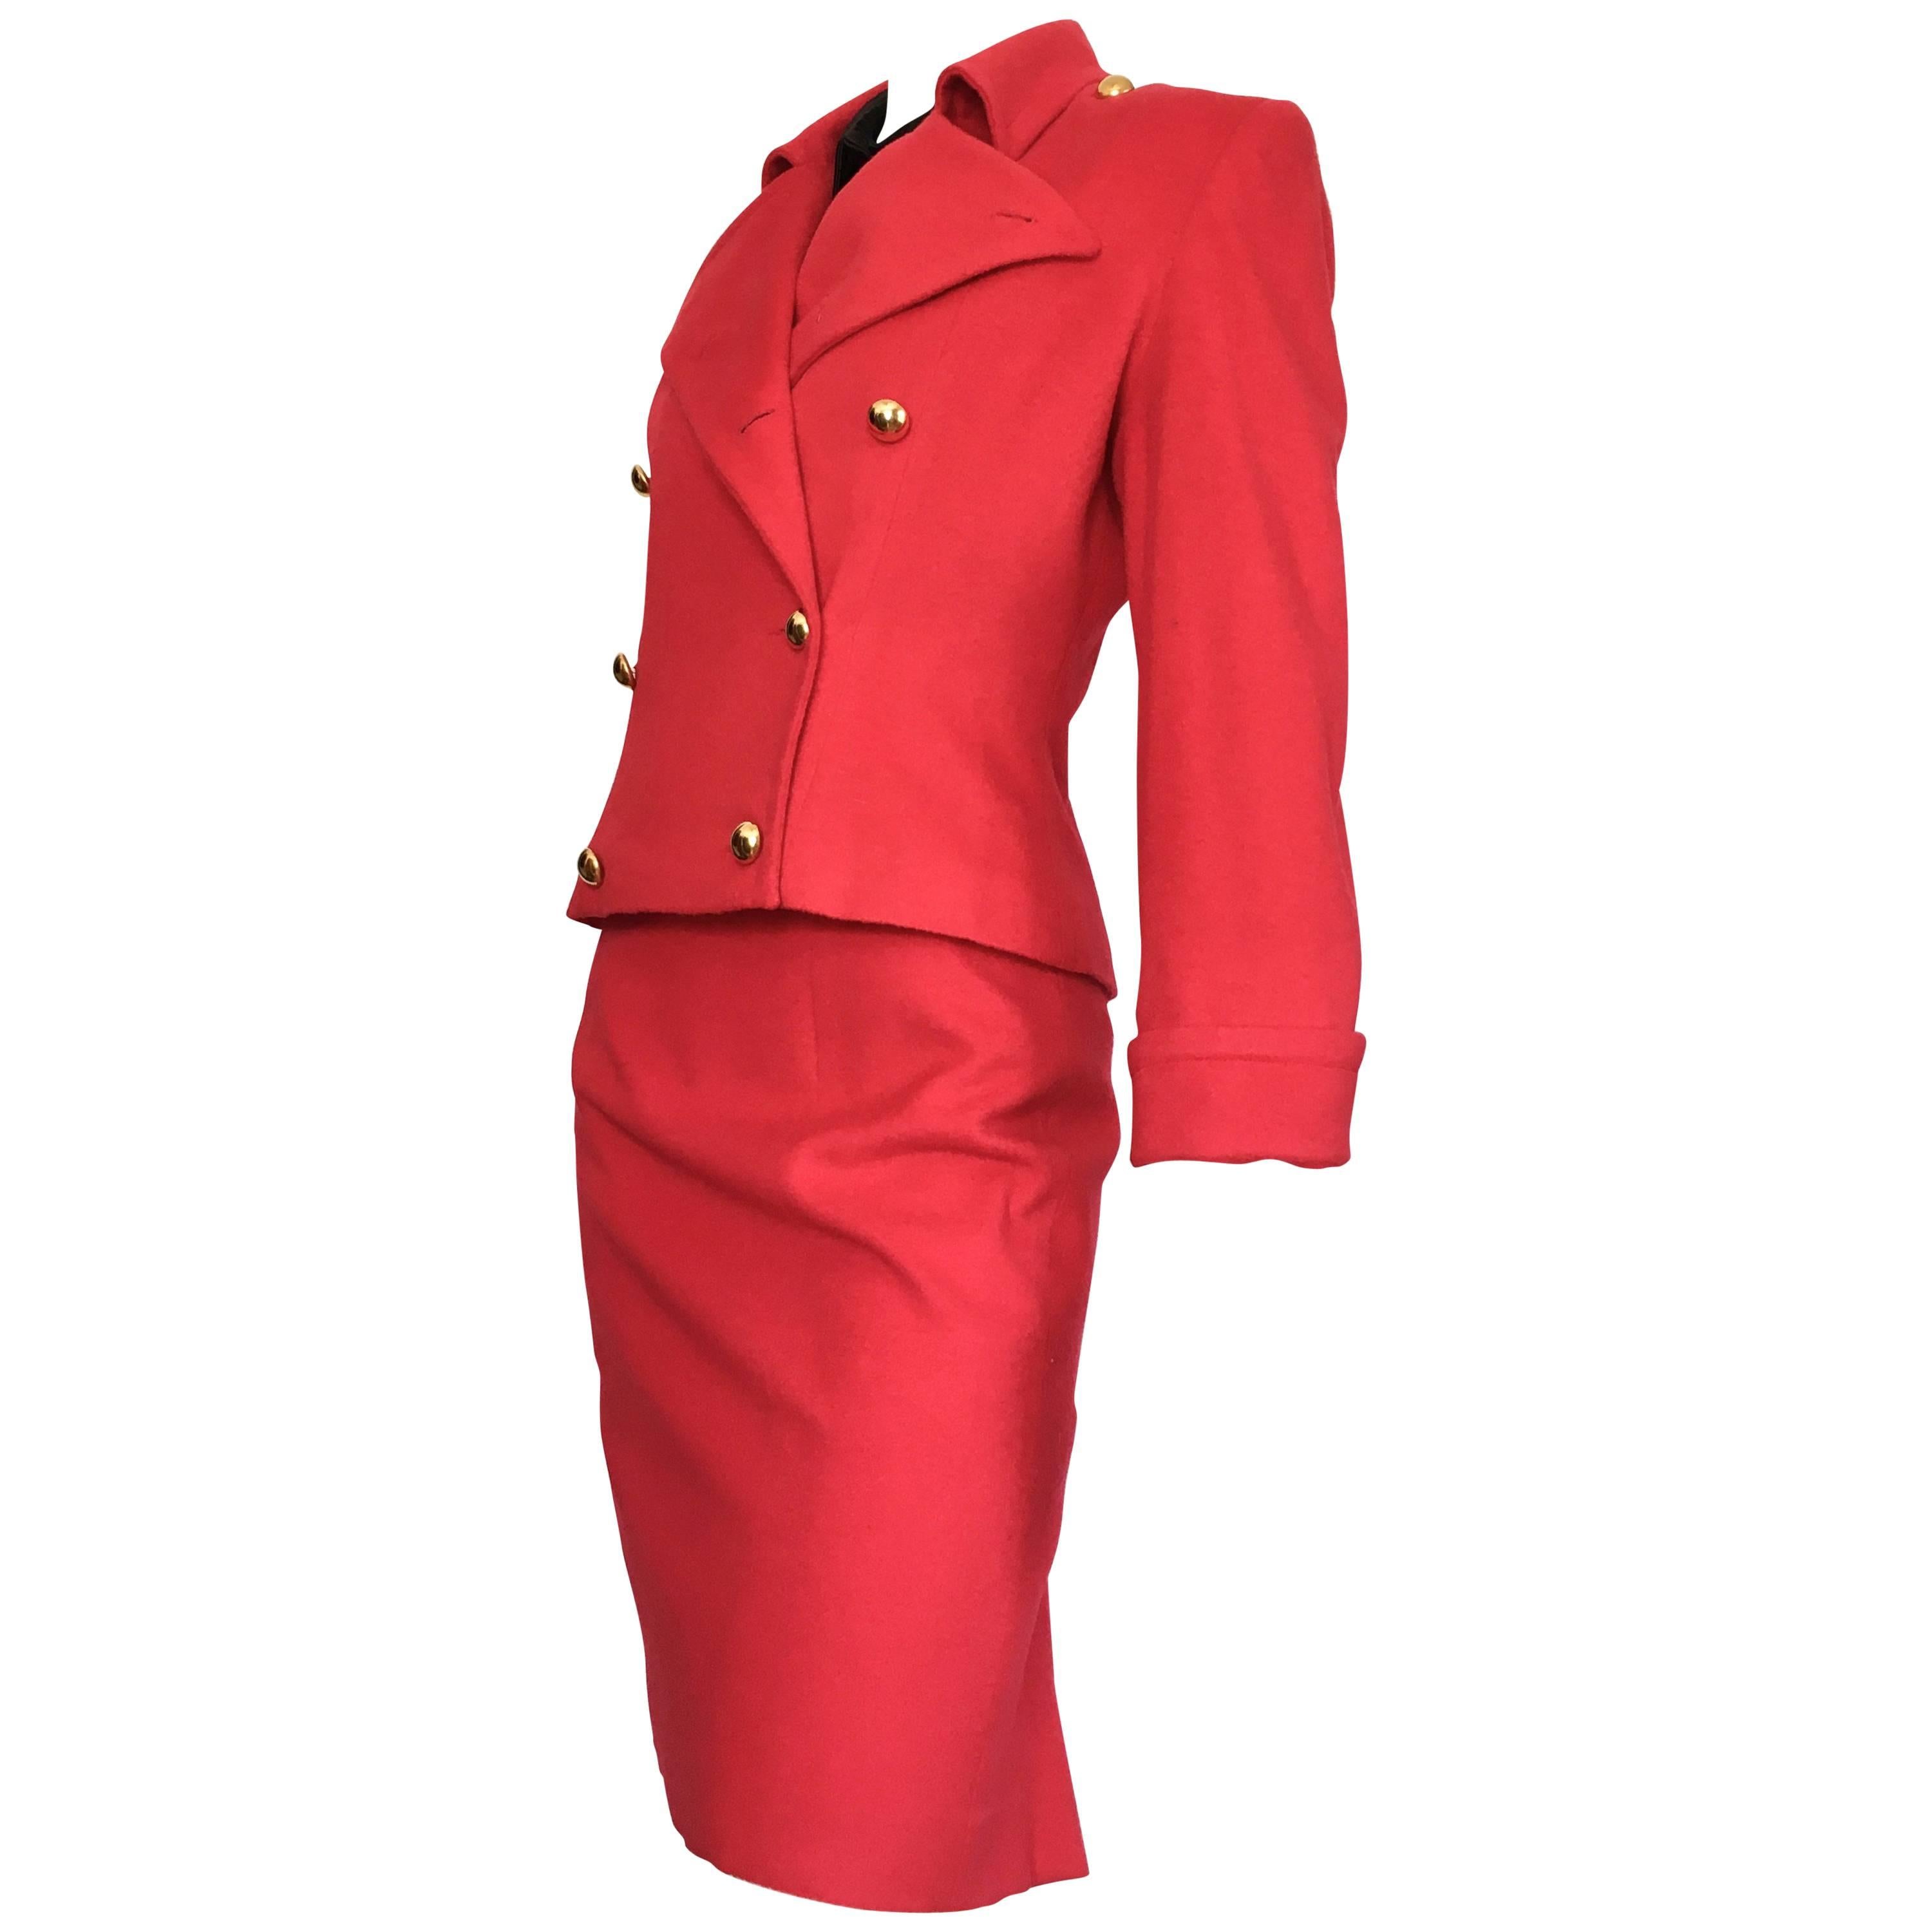 Patrick Kelly 1980s Red Wool Skirt Suit Size 6. For Sale